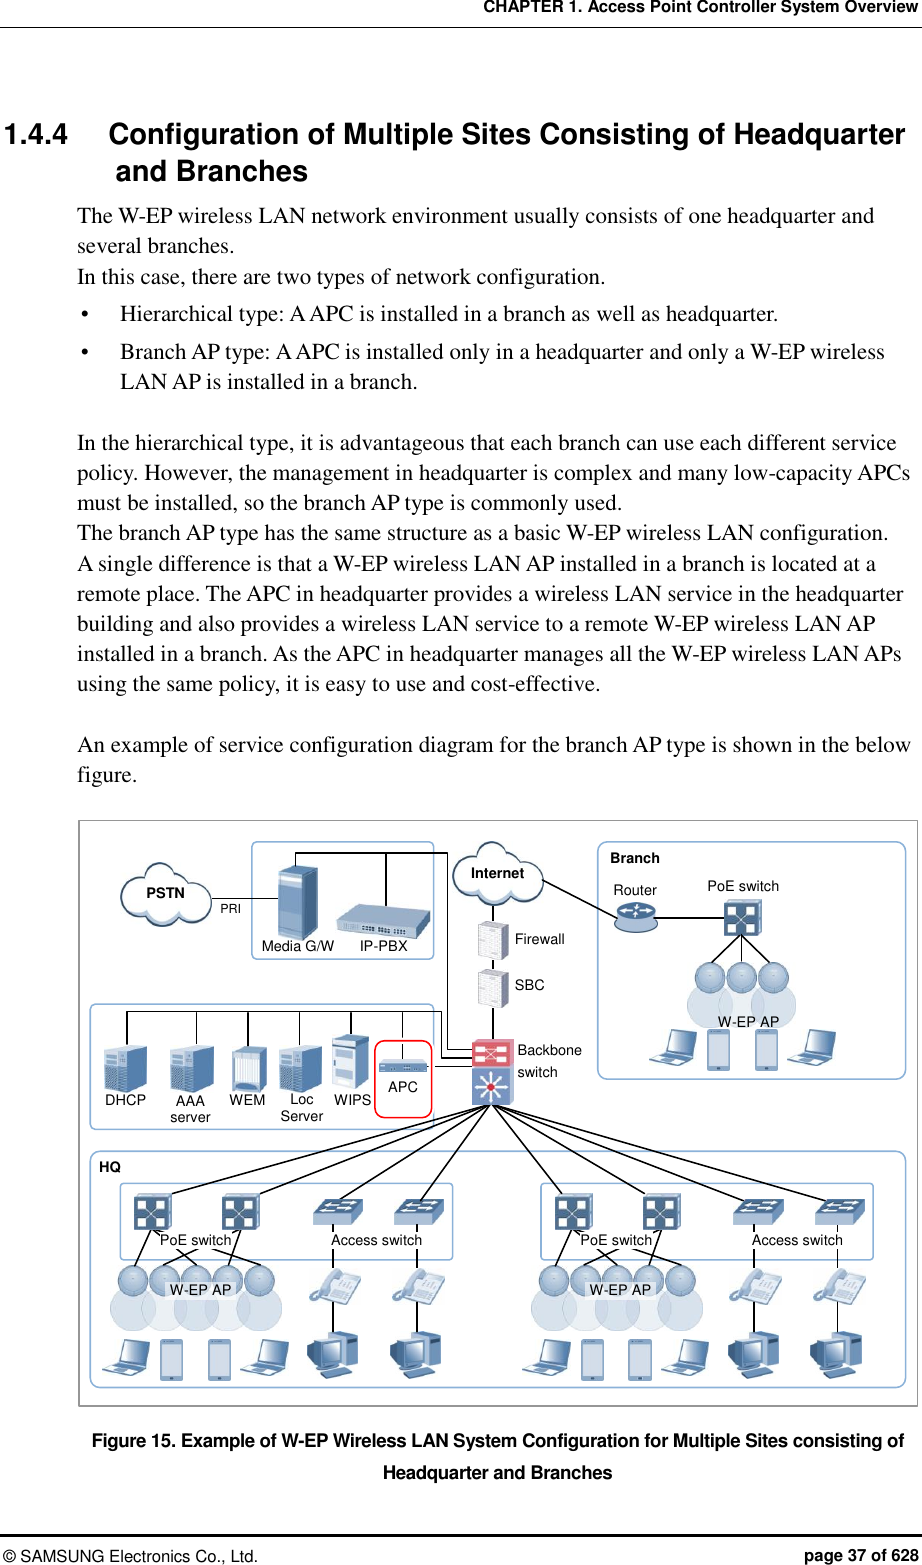 CHAPTER 1. Access Point Controller System Overview ©  SAMSUNG Electronics Co., Ltd.  page 37 of 628 1.4.4  Configuration of Multiple Sites Consisting of Headquarter and Branches The W-EP wireless LAN network environment usually consists of one headquarter and several branches.   In this case, there are two types of network configuration.    Hierarchical type: A APC is installed in a branch as well as headquarter.  Branch AP type: A APC is installed only in a headquarter and only a W-EP wireless LAN AP is installed in a branch.  In the hierarchical type, it is advantageous that each branch can use each different service policy. However, the management in headquarter is complex and many low-capacity APCs must be installed, so the branch AP type is commonly used.   The branch AP type has the same structure as a basic W-EP wireless LAN configuration.   A single difference is that a W-EP wireless LAN AP installed in a branch is located at a remote place. The APC in headquarter provides a wireless LAN service in the headquarter building and also provides a wireless LAN service to a remote W-EP wireless LAN AP installed in a branch. As the APC in headquarter manages all the W-EP wireless LAN APs using the same policy, it is easy to use and cost-effective.    An example of service configuration diagram for the branch AP type is shown in the below figure.  Figure 15. Example of W-EP Wireless LAN System Configuration for Multiple Sites consisting of Headquarter and Branches PRI Firewall Internet Backbone switch   SBC PSTN IP-PBX Media G/W APC  WIPS Loc Server WEM AAA server DHCP Router Branch PoE switch   W-EP AP HQ PoE switch  Access switch  PoE switch  Access switch  W-EP AP W-EP AP 